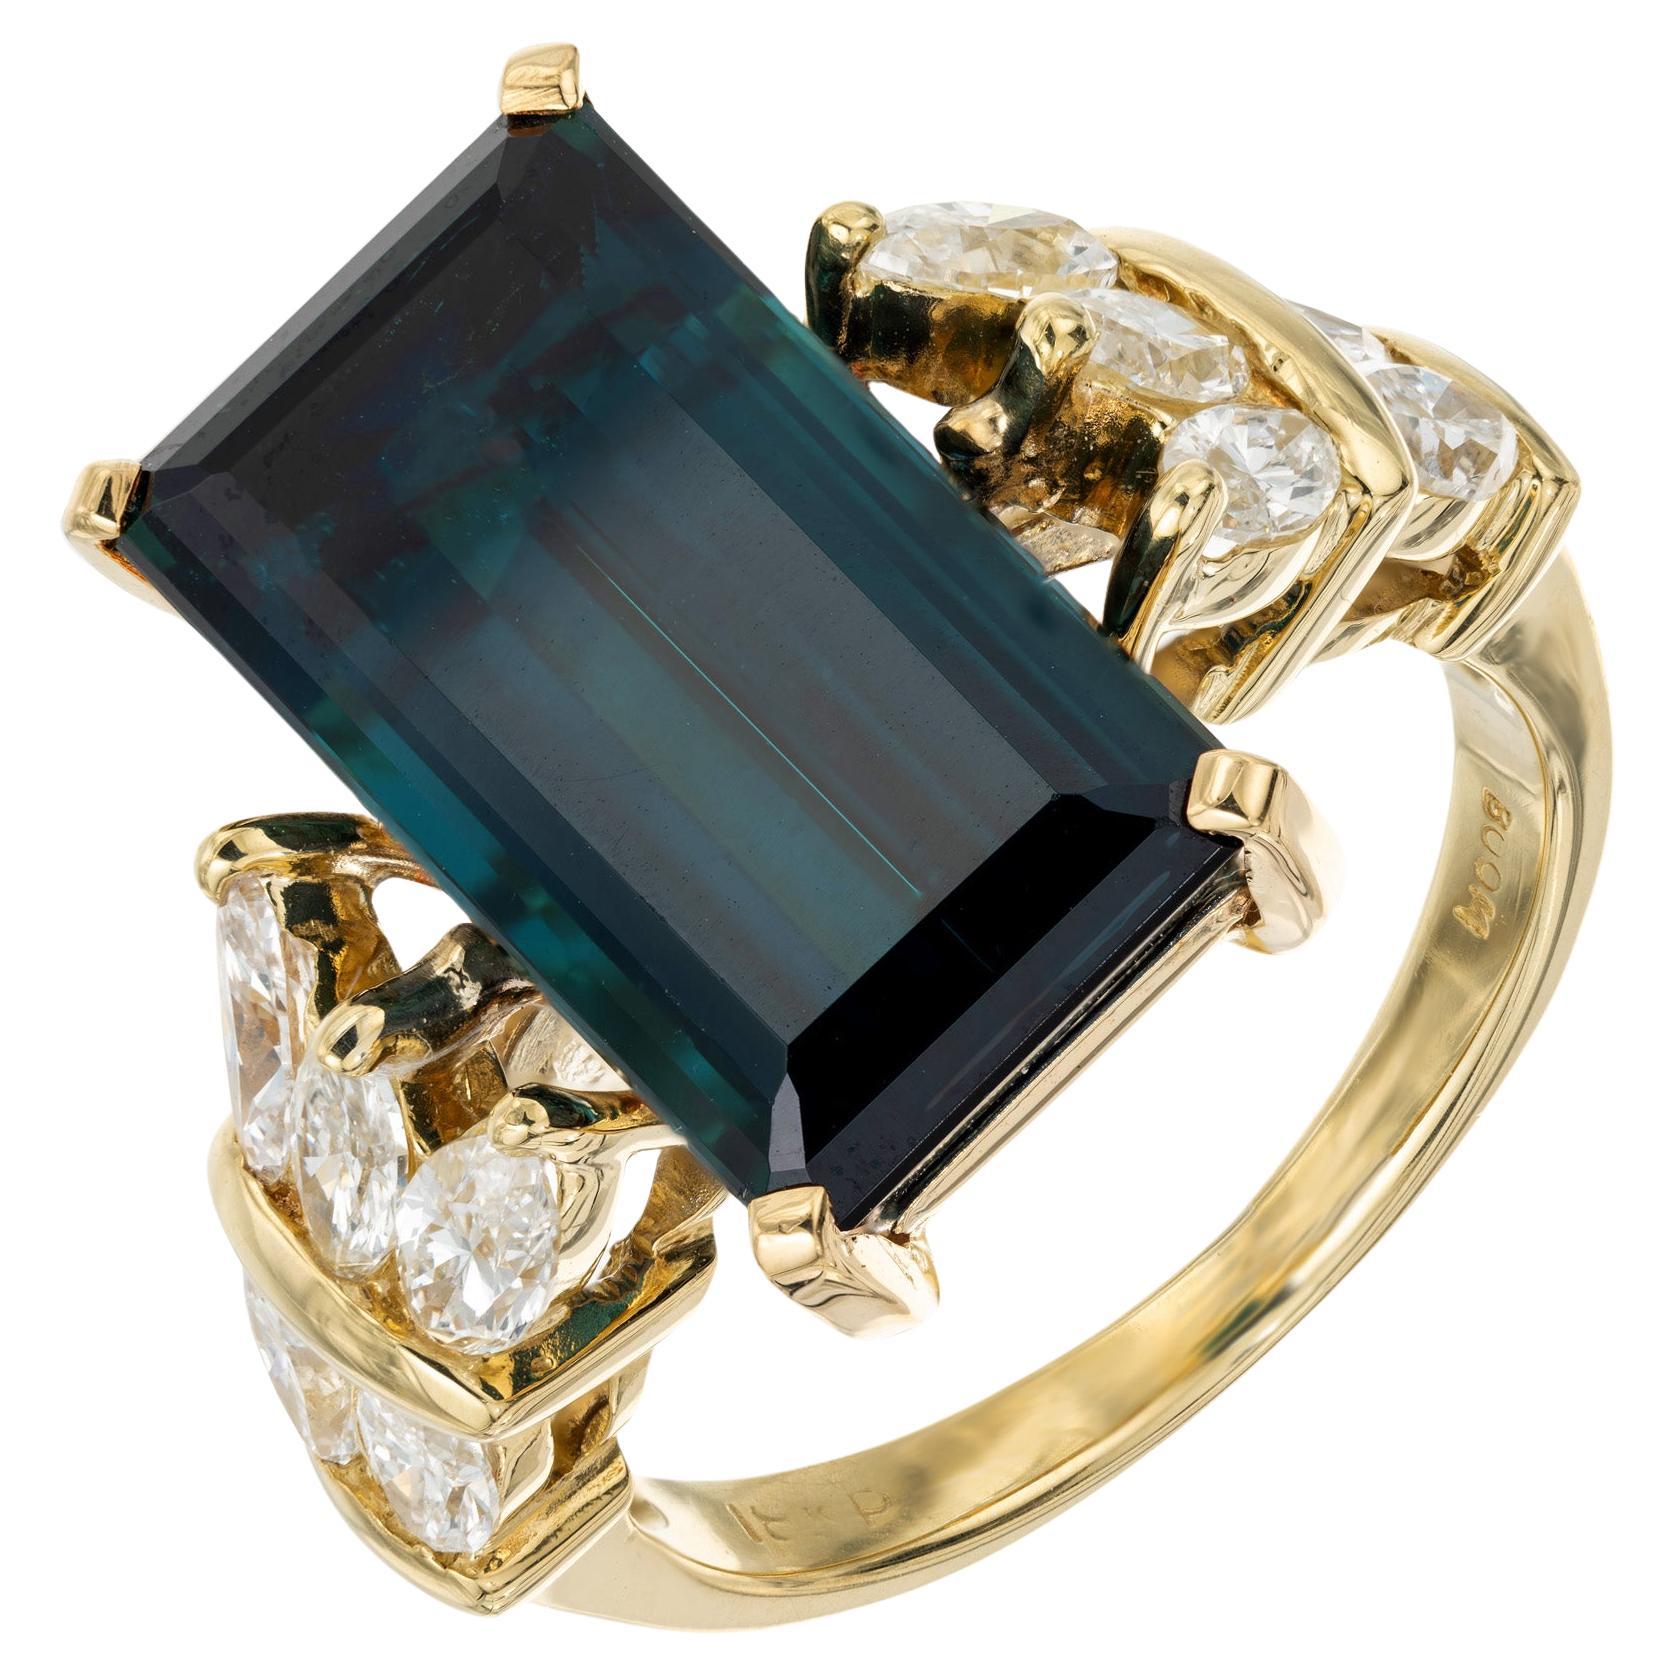 1960's Blue green Indicolite Tourmaline and diamond ring. This timeless piece starts with an Emerald cut greenish blue Indicolite Tourmaline center stone, totaling 8.55cts. The mounting is 18k yellow gold and adorned with five Marquise accent